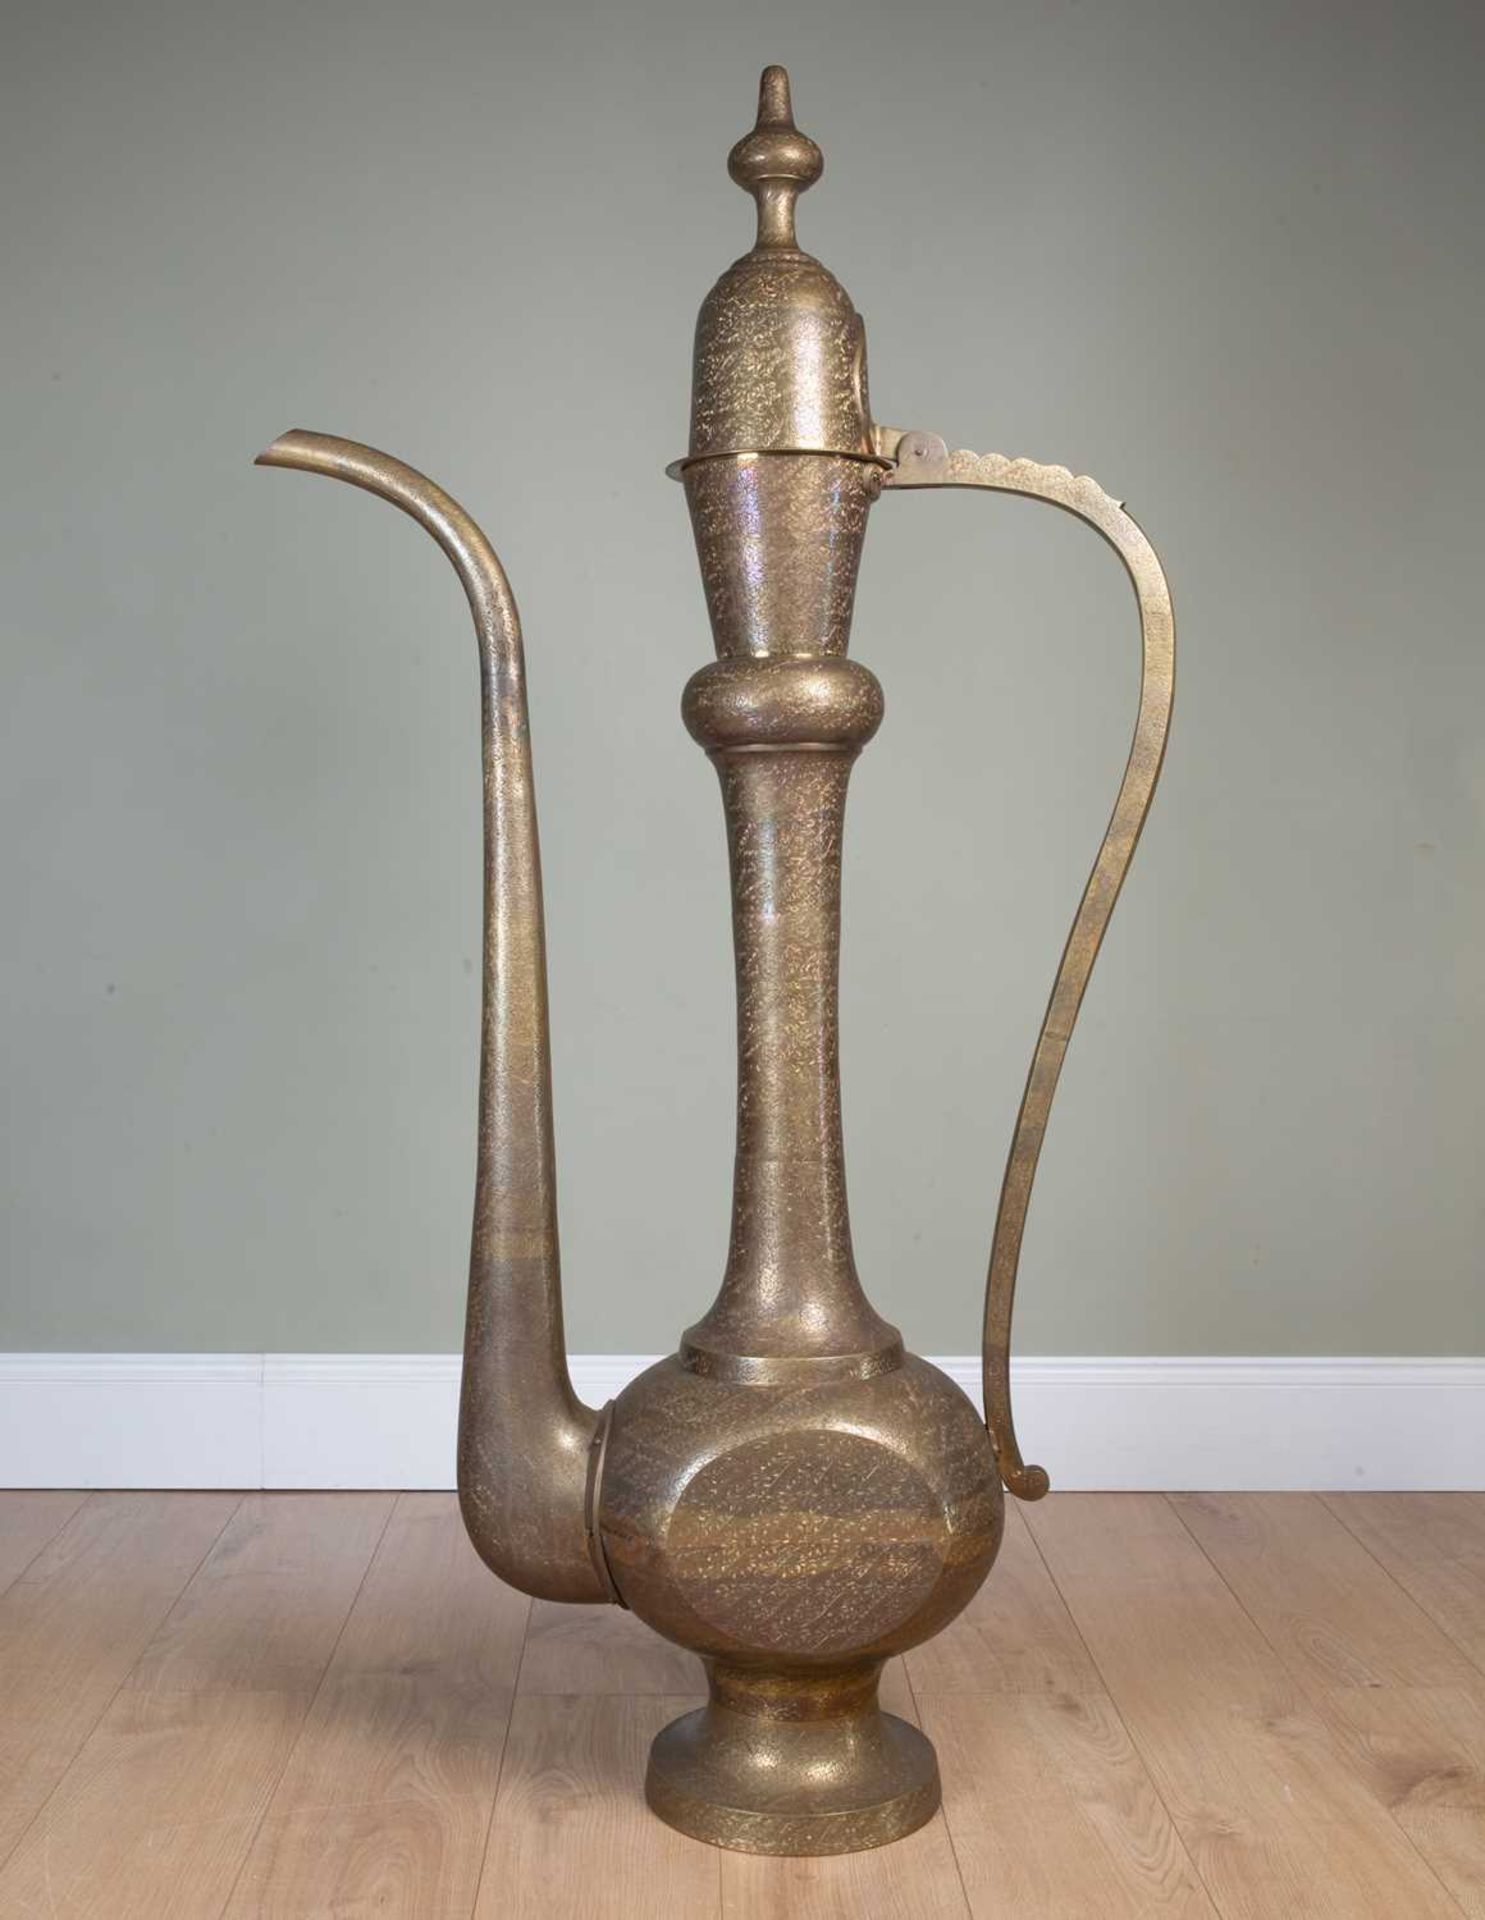 A large decorative Oriental brass display dallah coffee pot with floral chased and engraved